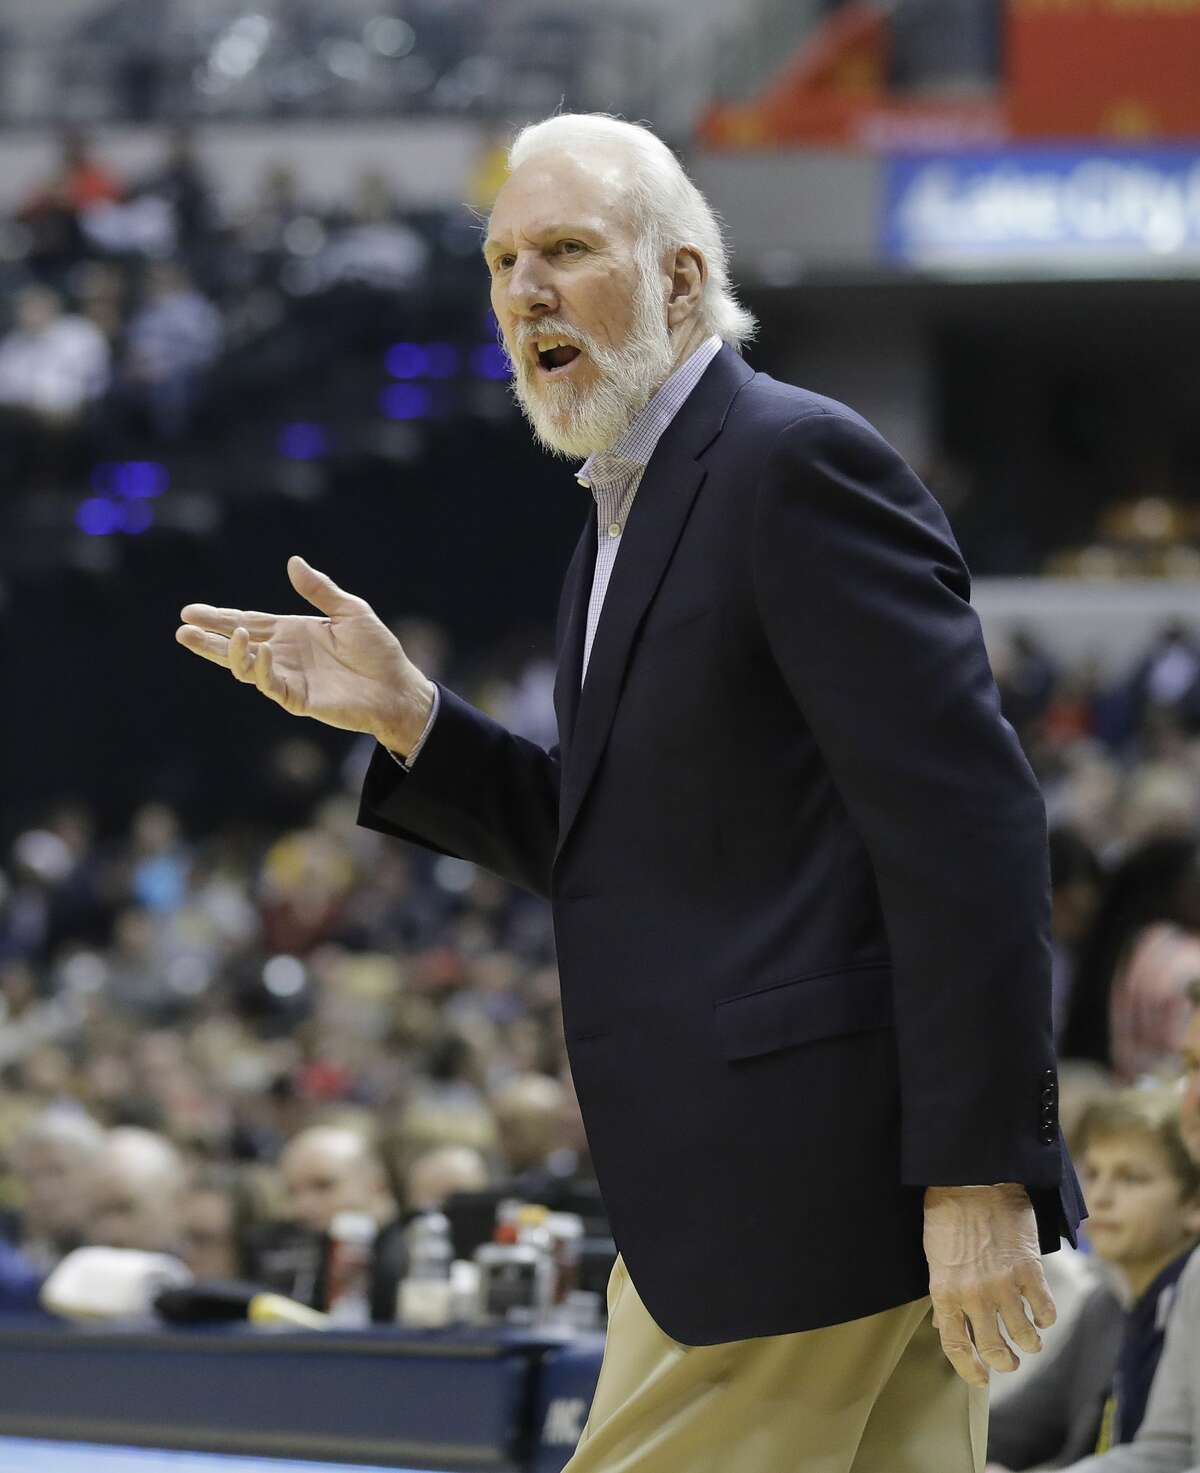 San Antonio Spurs head coach Gregg Popovich questions a call during the first half of an NBA basketball game against the Indiana Pacers, Monday, Feb. 13, 2017, in Indianapolis. (AP Photo/Darron Cummings)